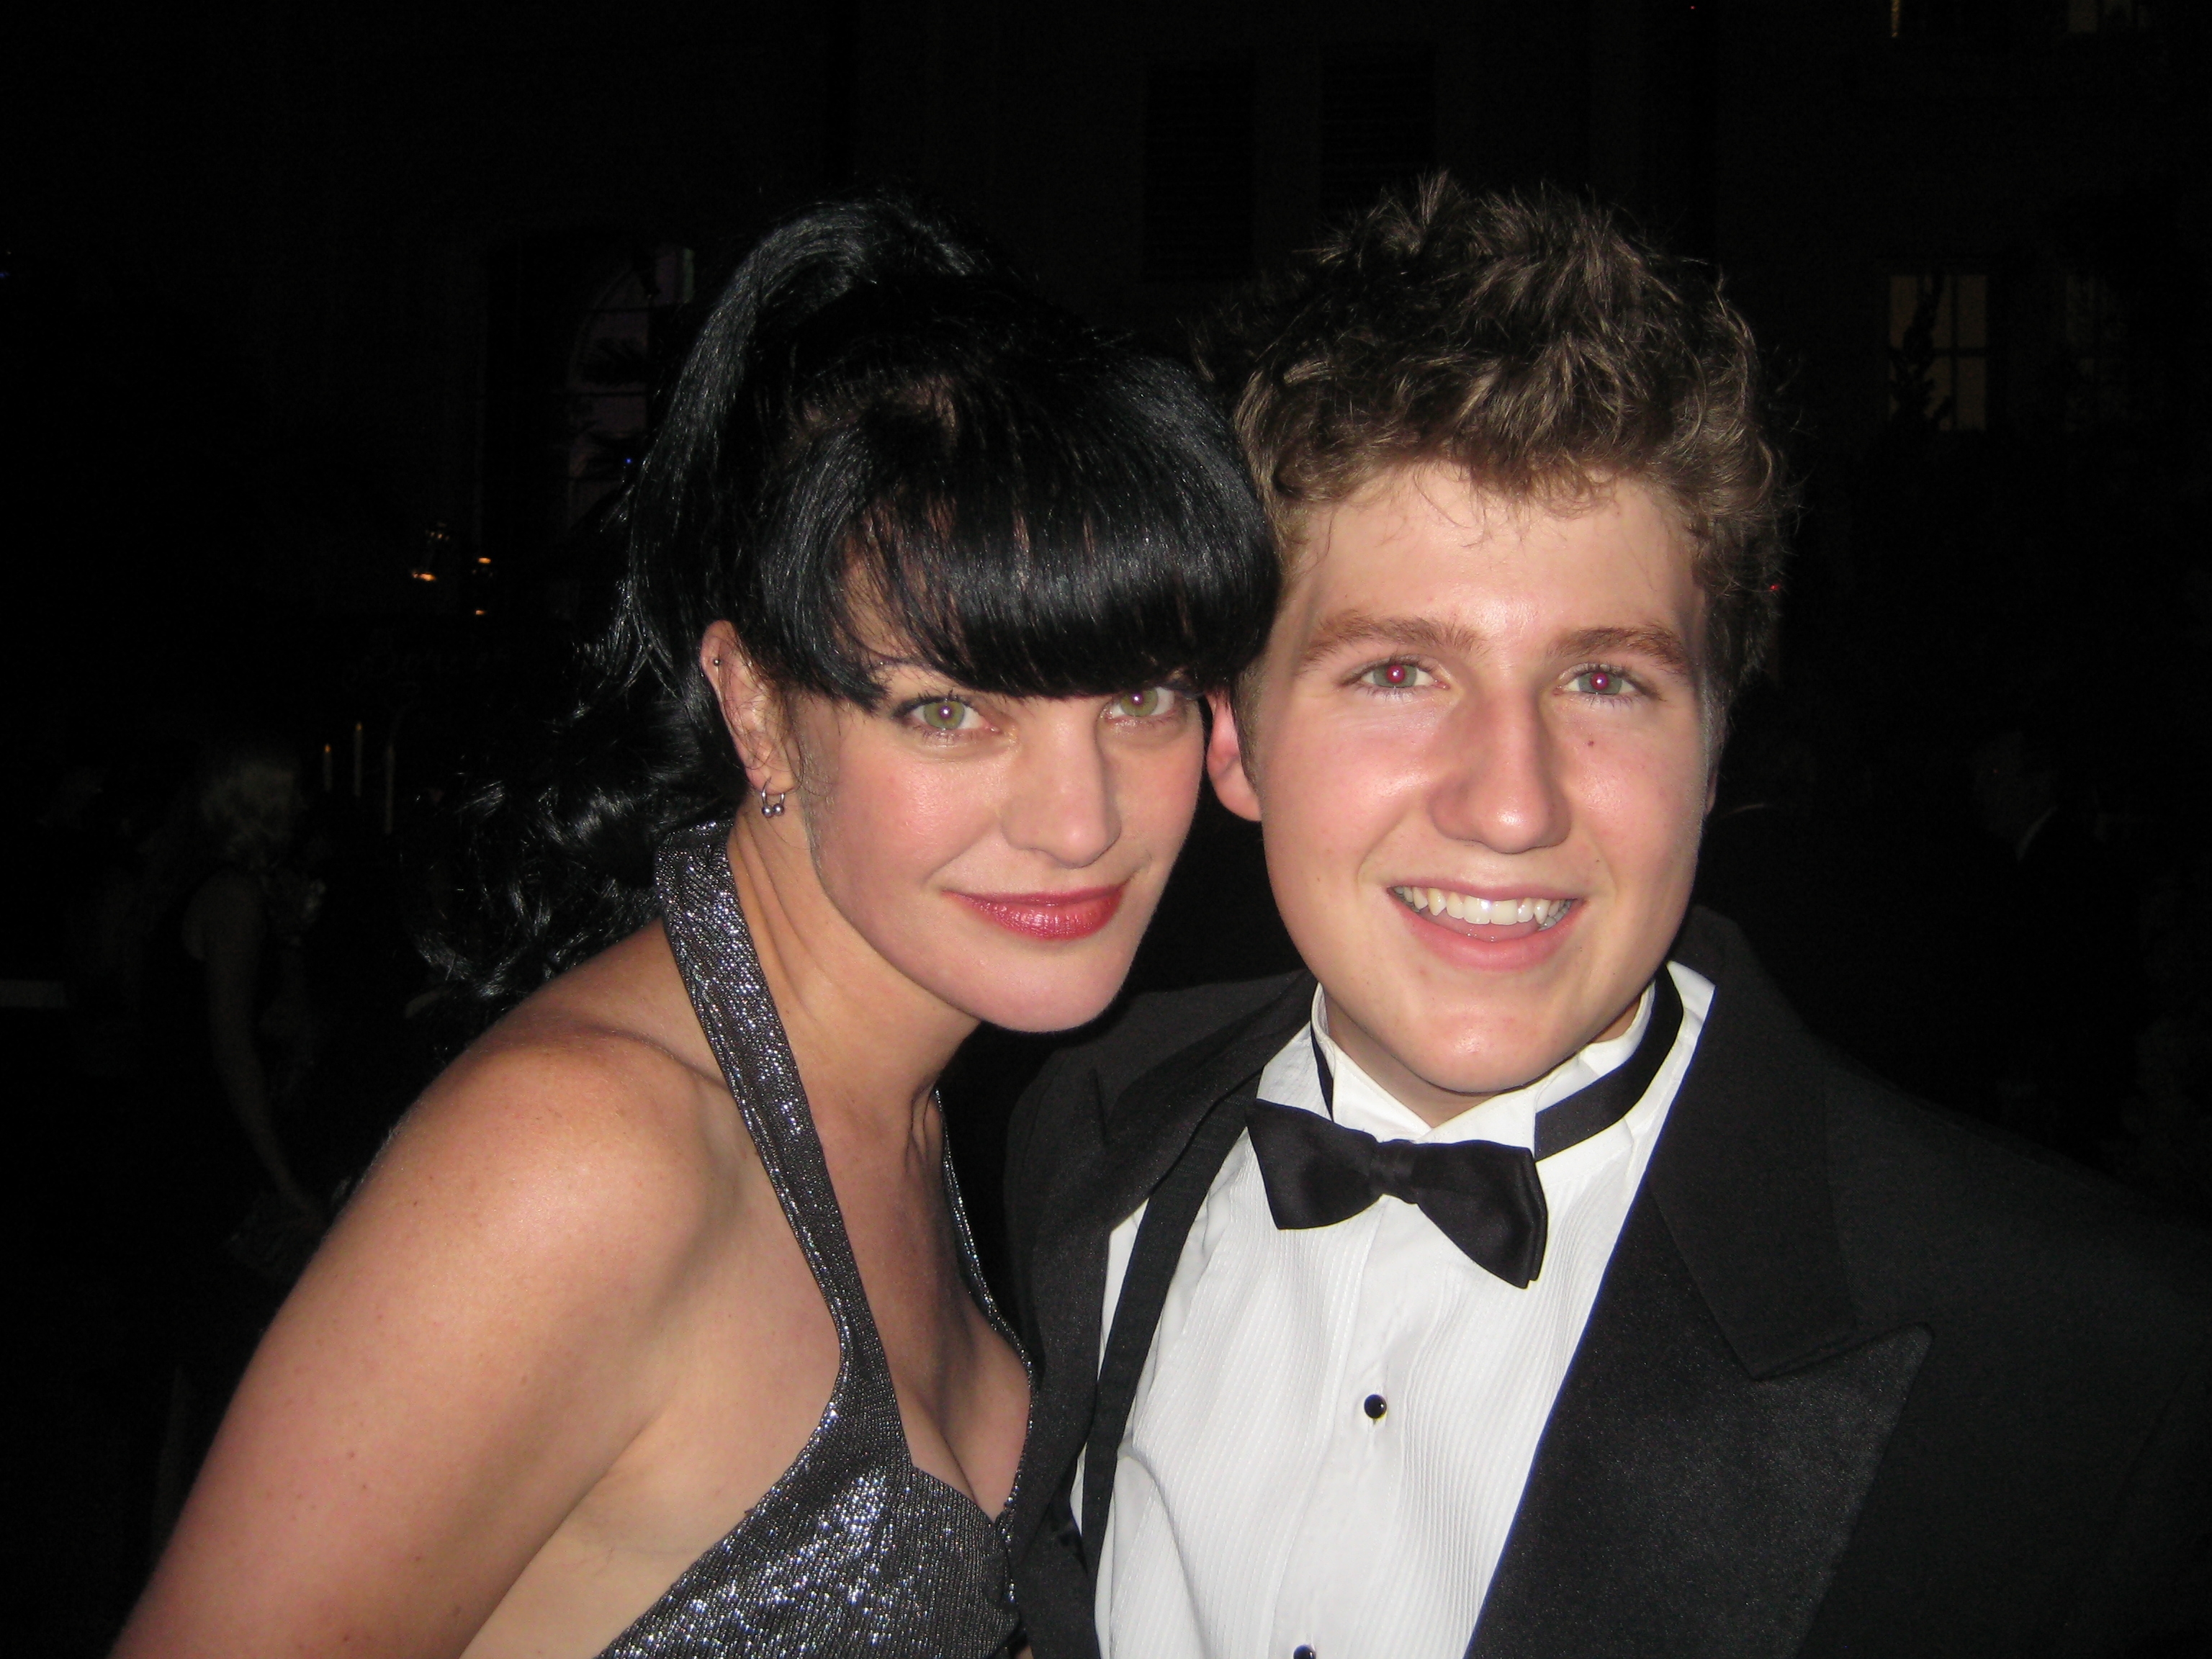 David with one of favorite female actress, Ms Pauley Perrette of NCIS.